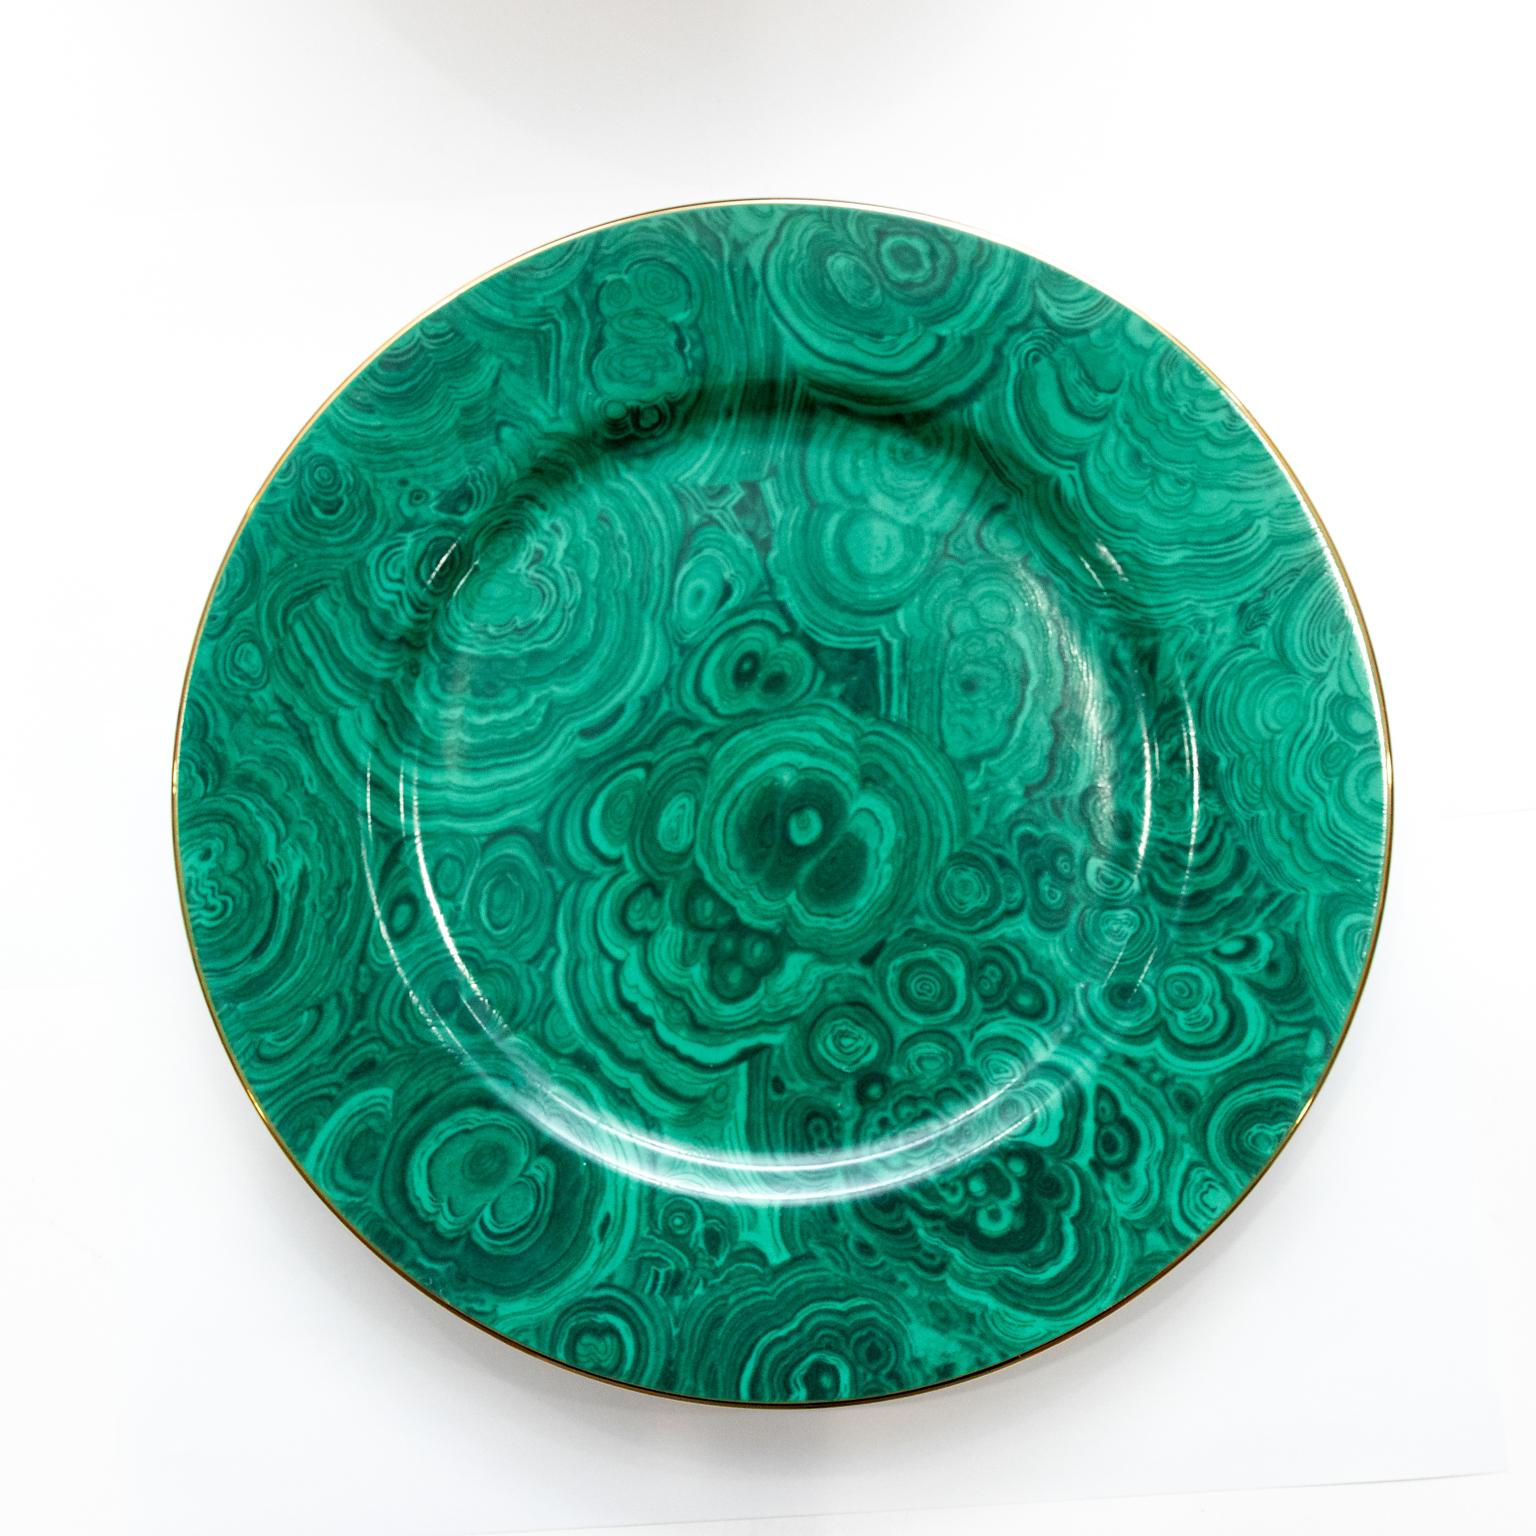 American Neiman Marcus Mid-Century Green and Gold Faux Malachite Plate Chargers For Sale